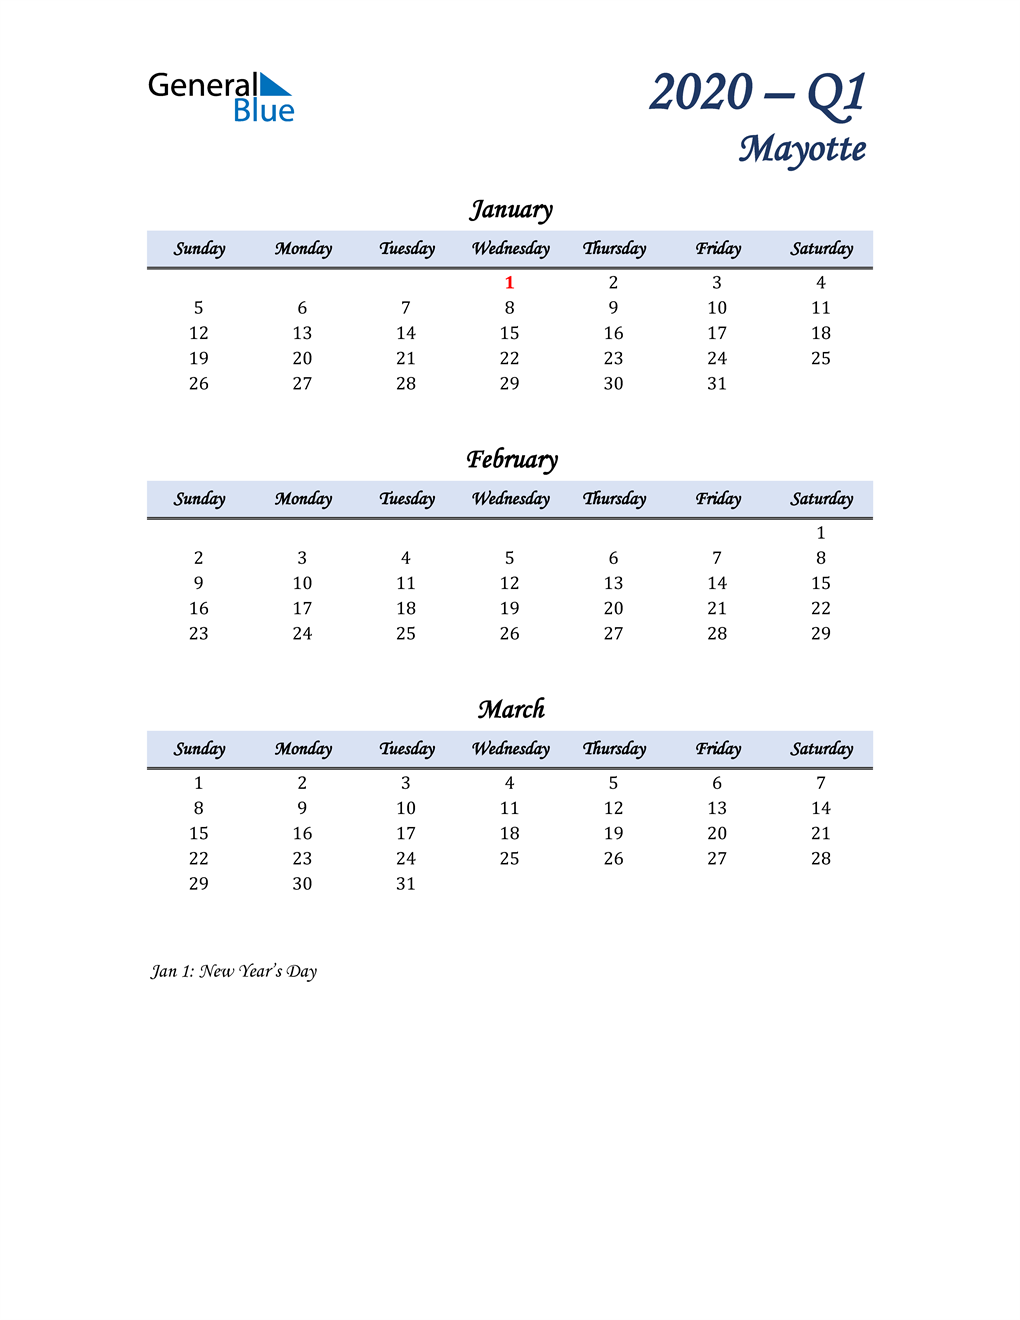  January, February, and March Calendar for Mayotte